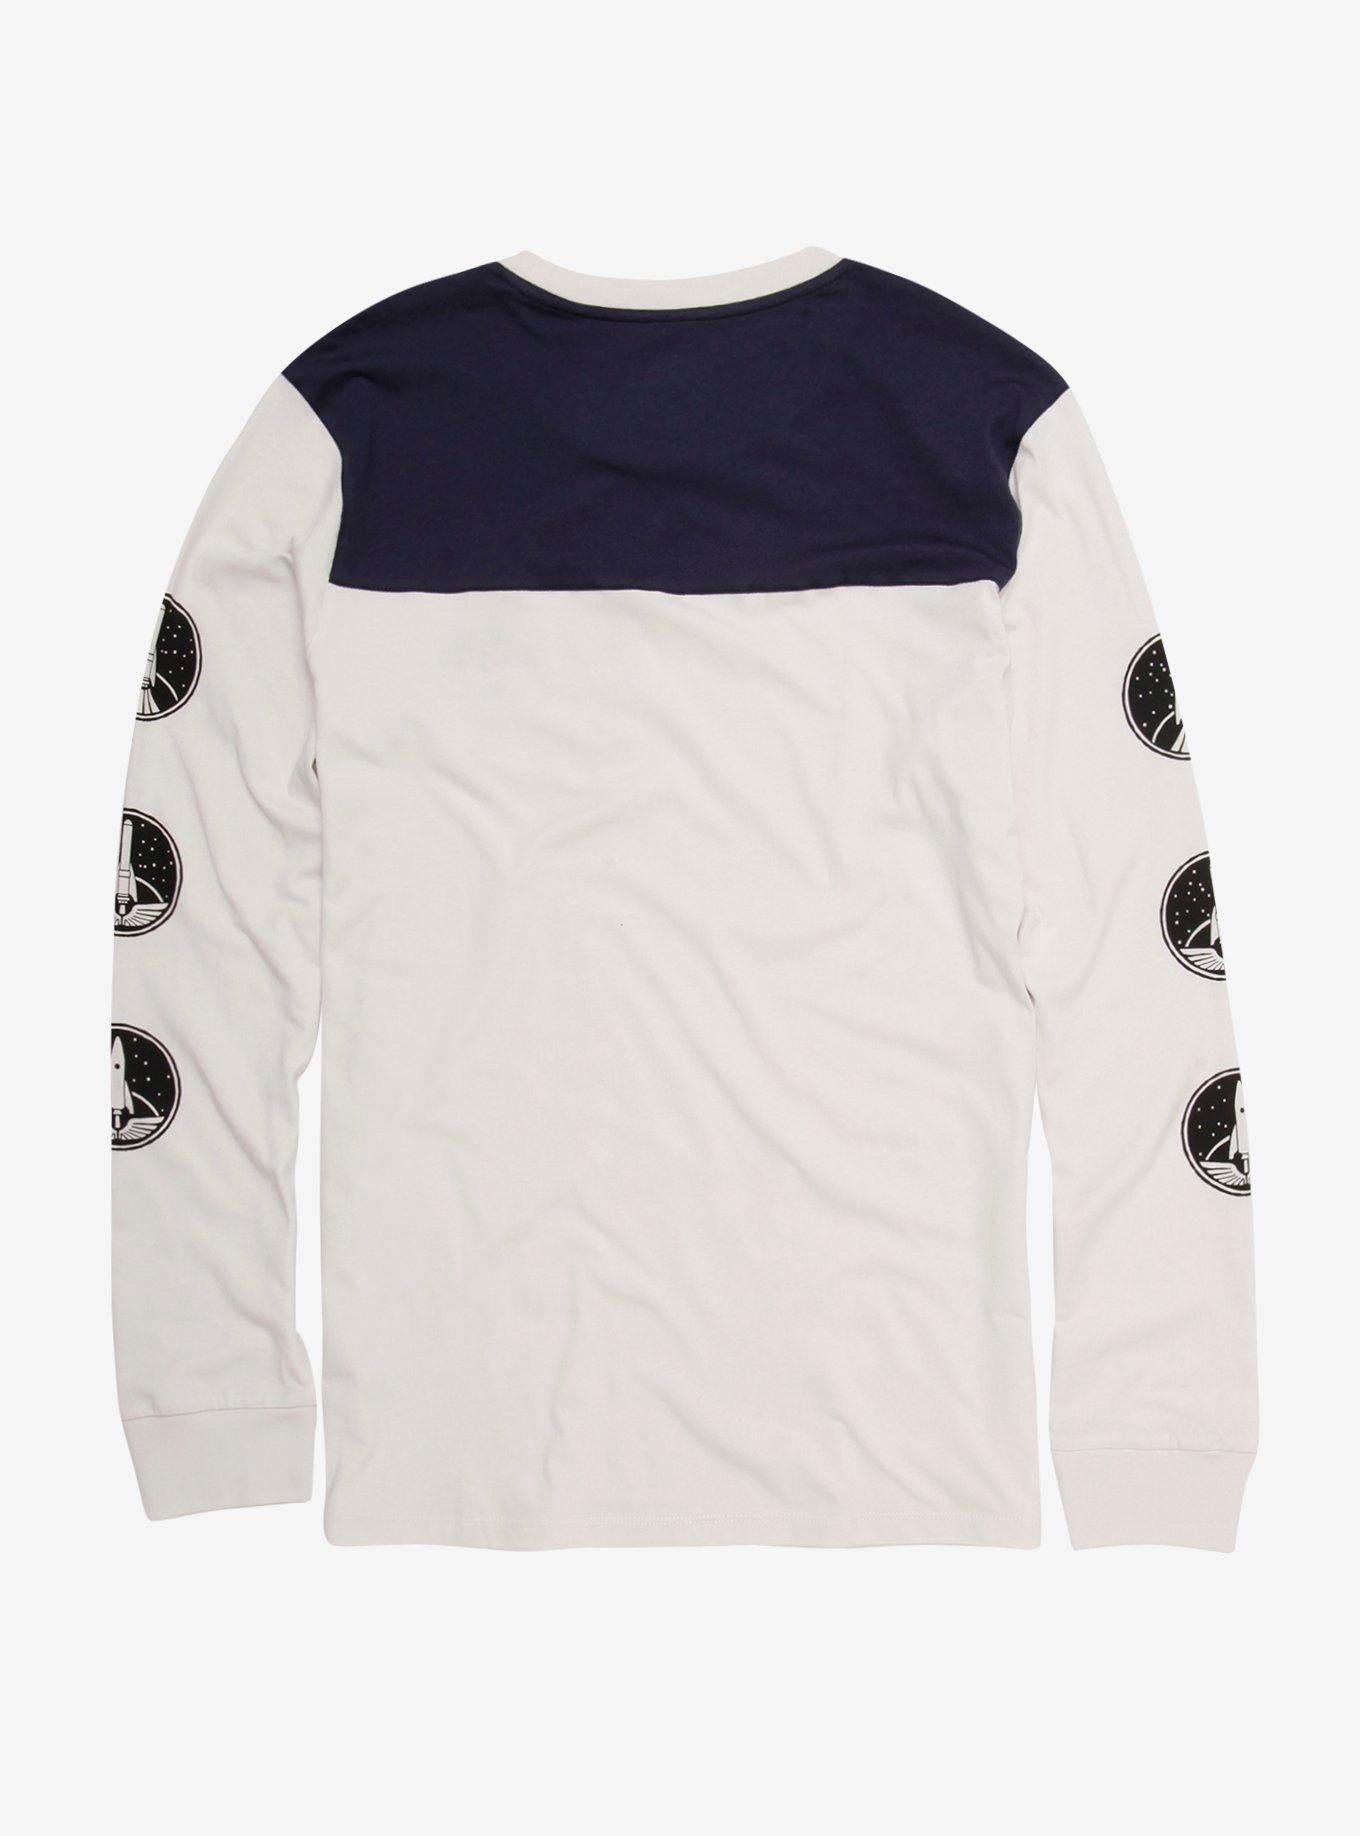 The Umbrella Academy Luther Space Long-Sleeve T-Shirt, BLACK, alternate